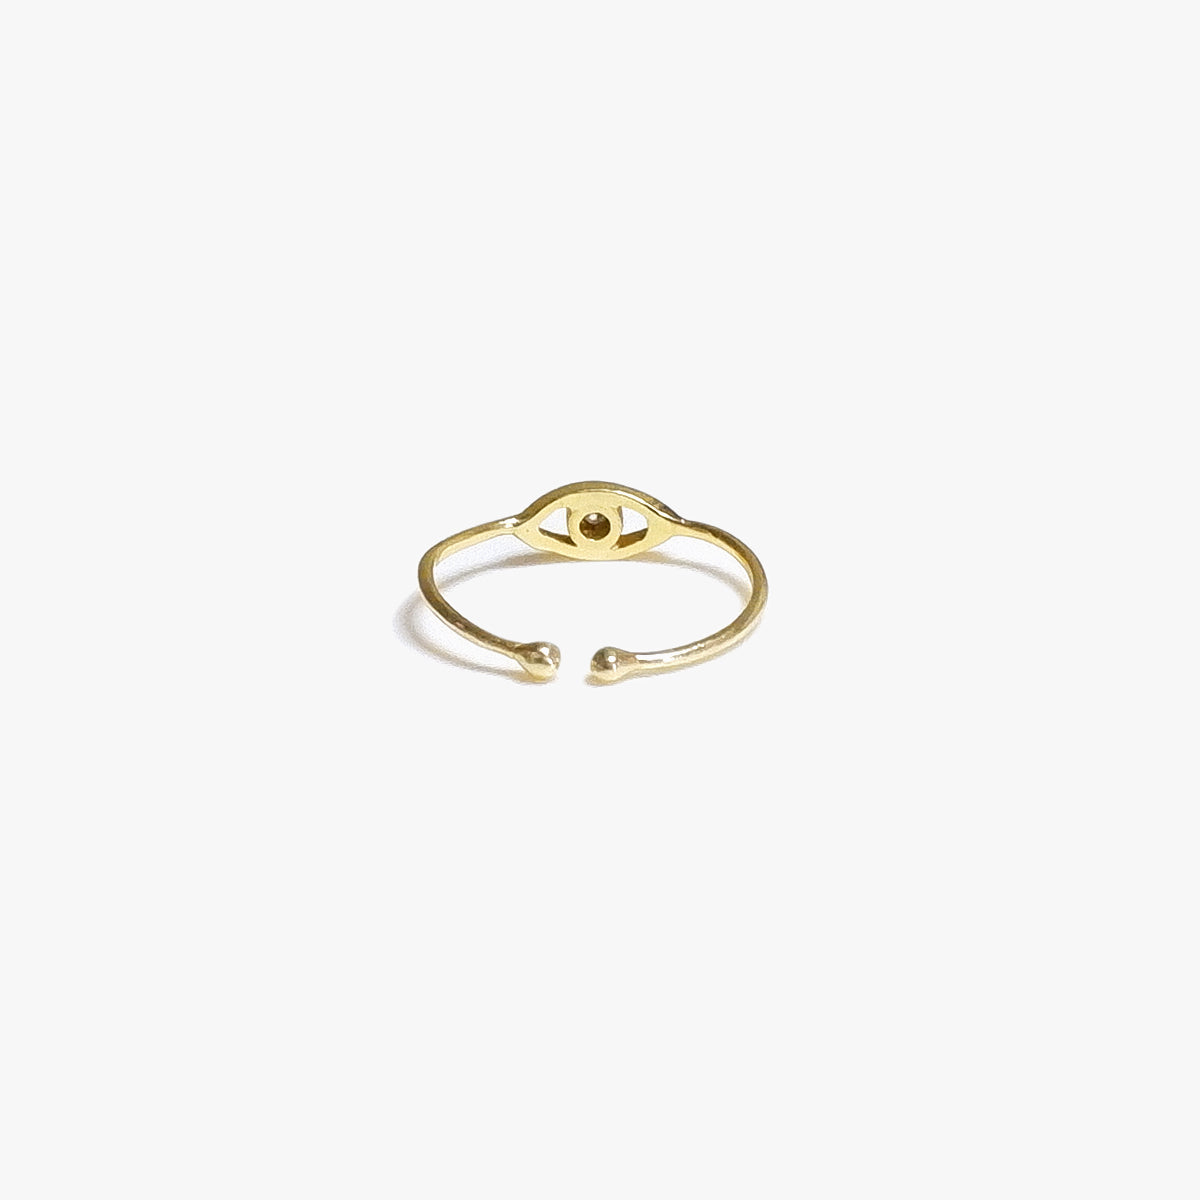 The Any-size Evil Eye Diamond Ring in Solid Gold